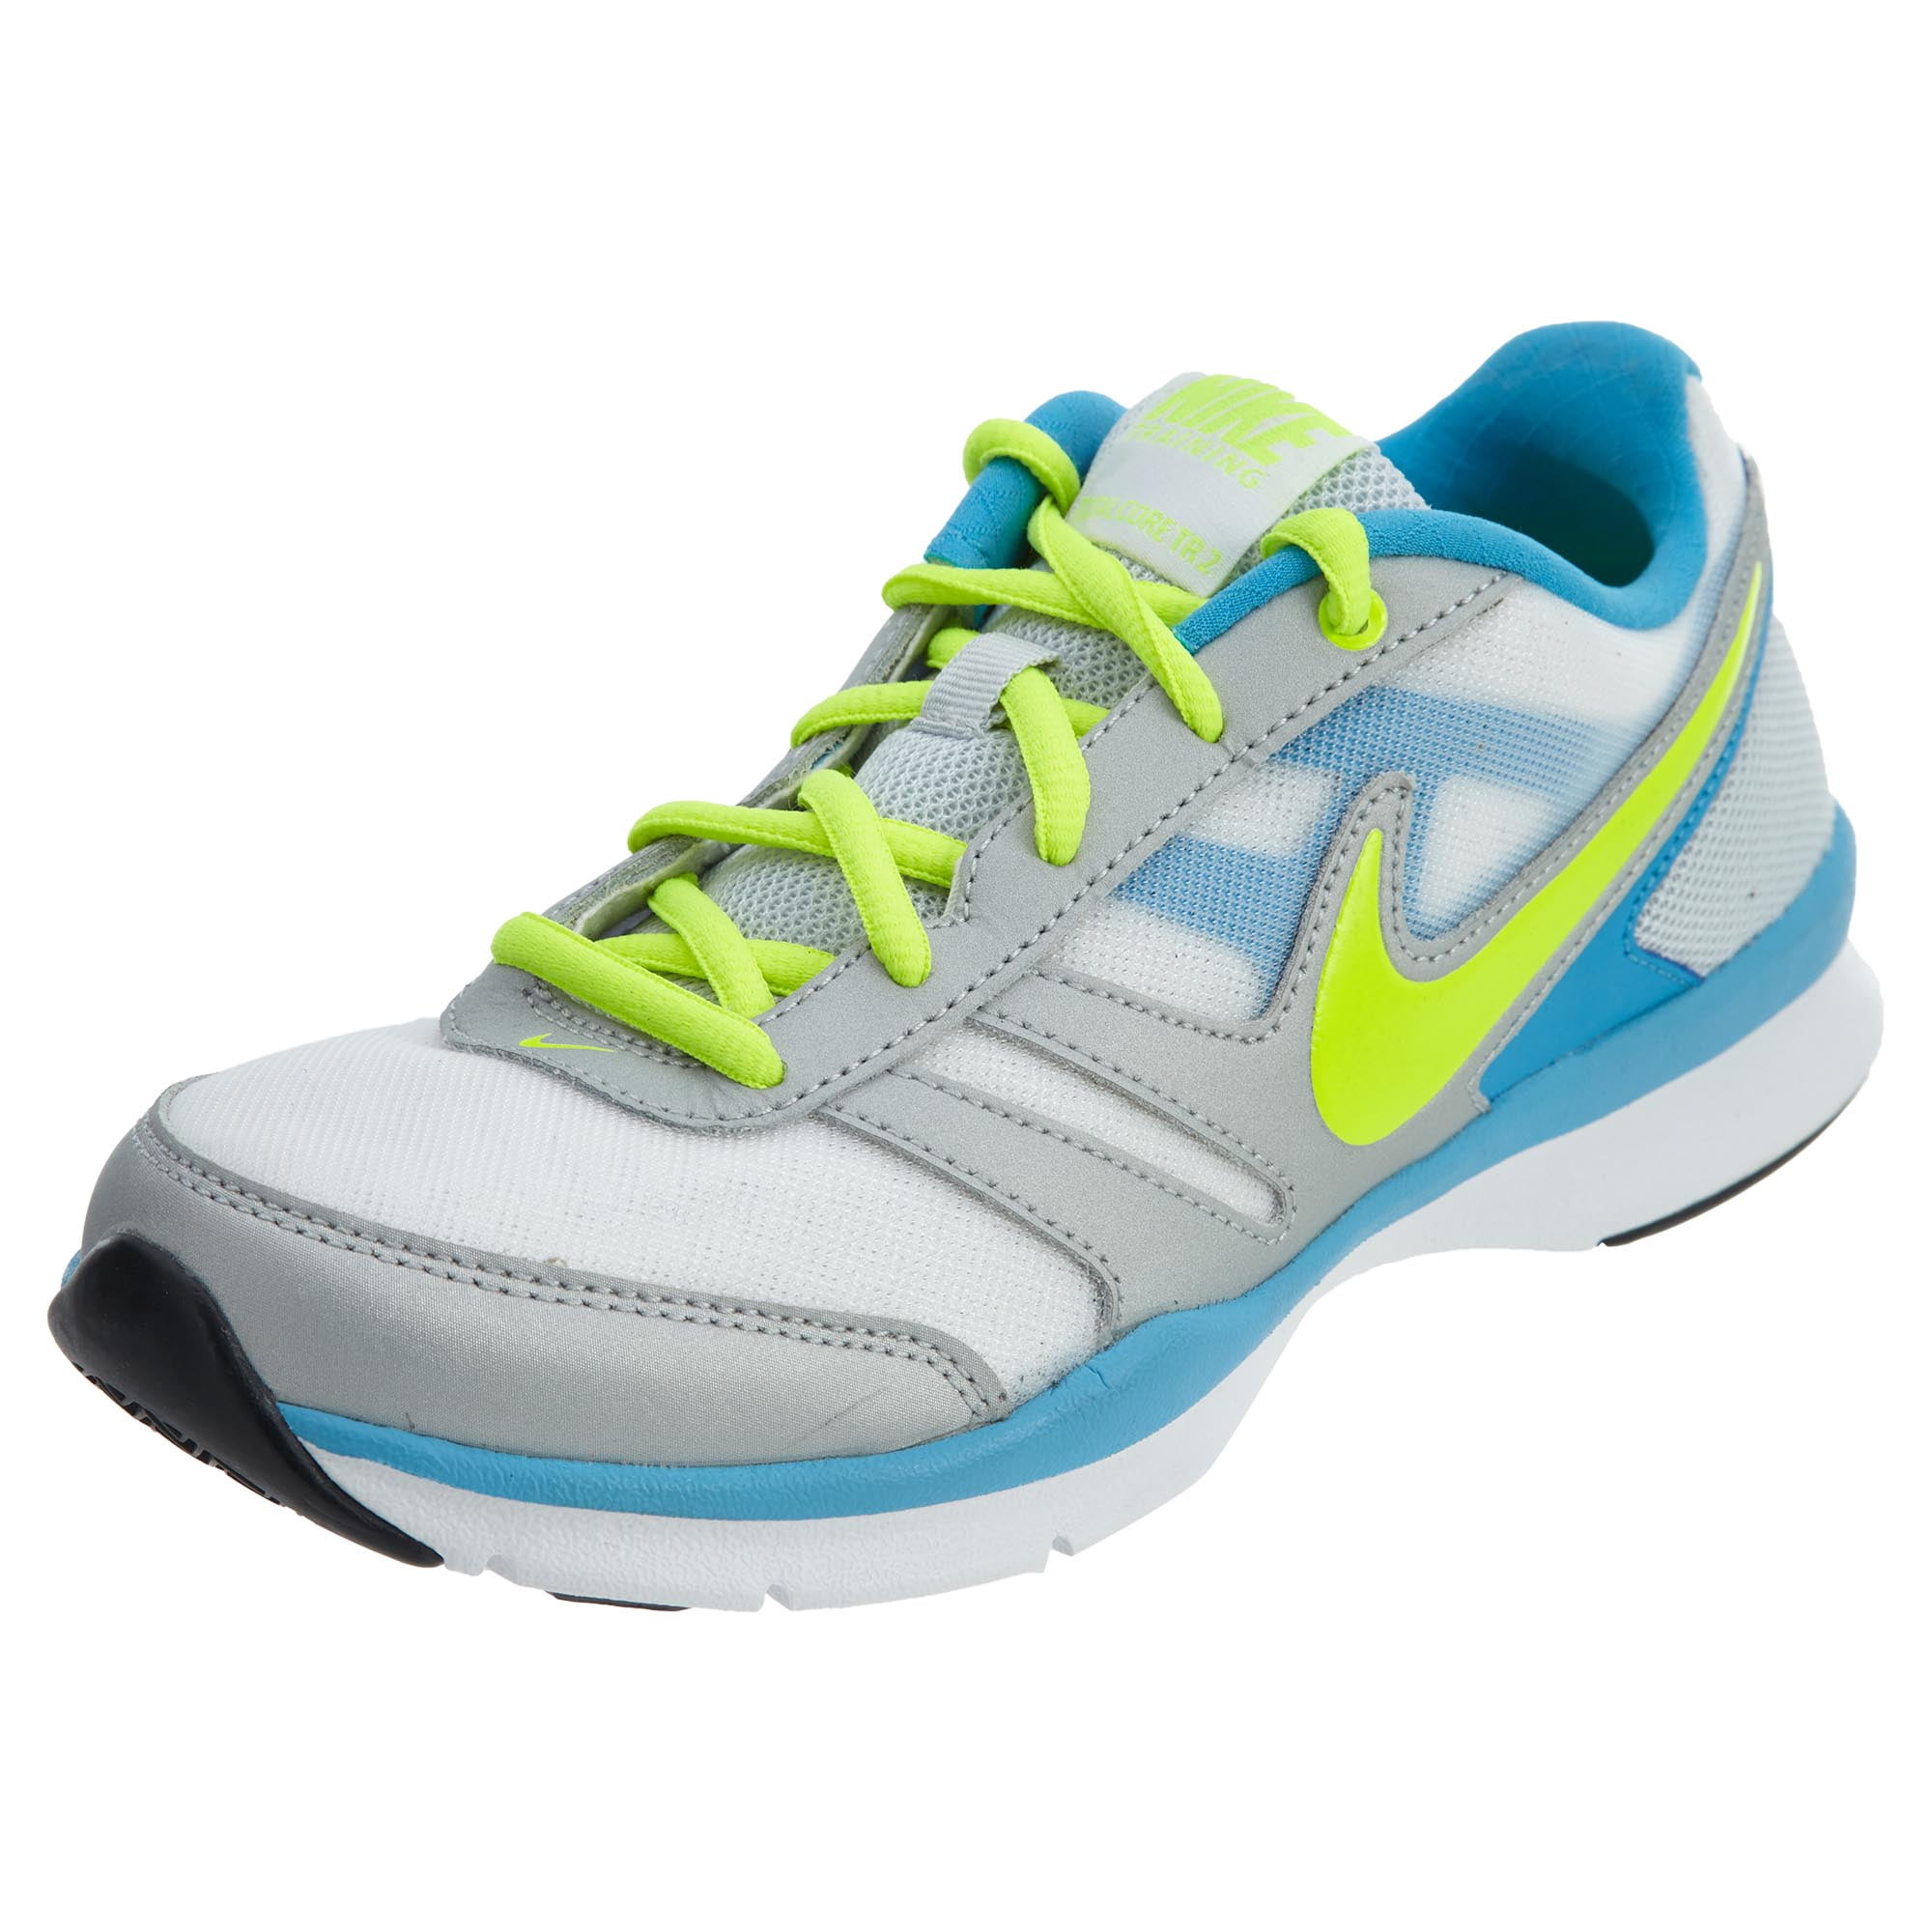 nike total core trainer review